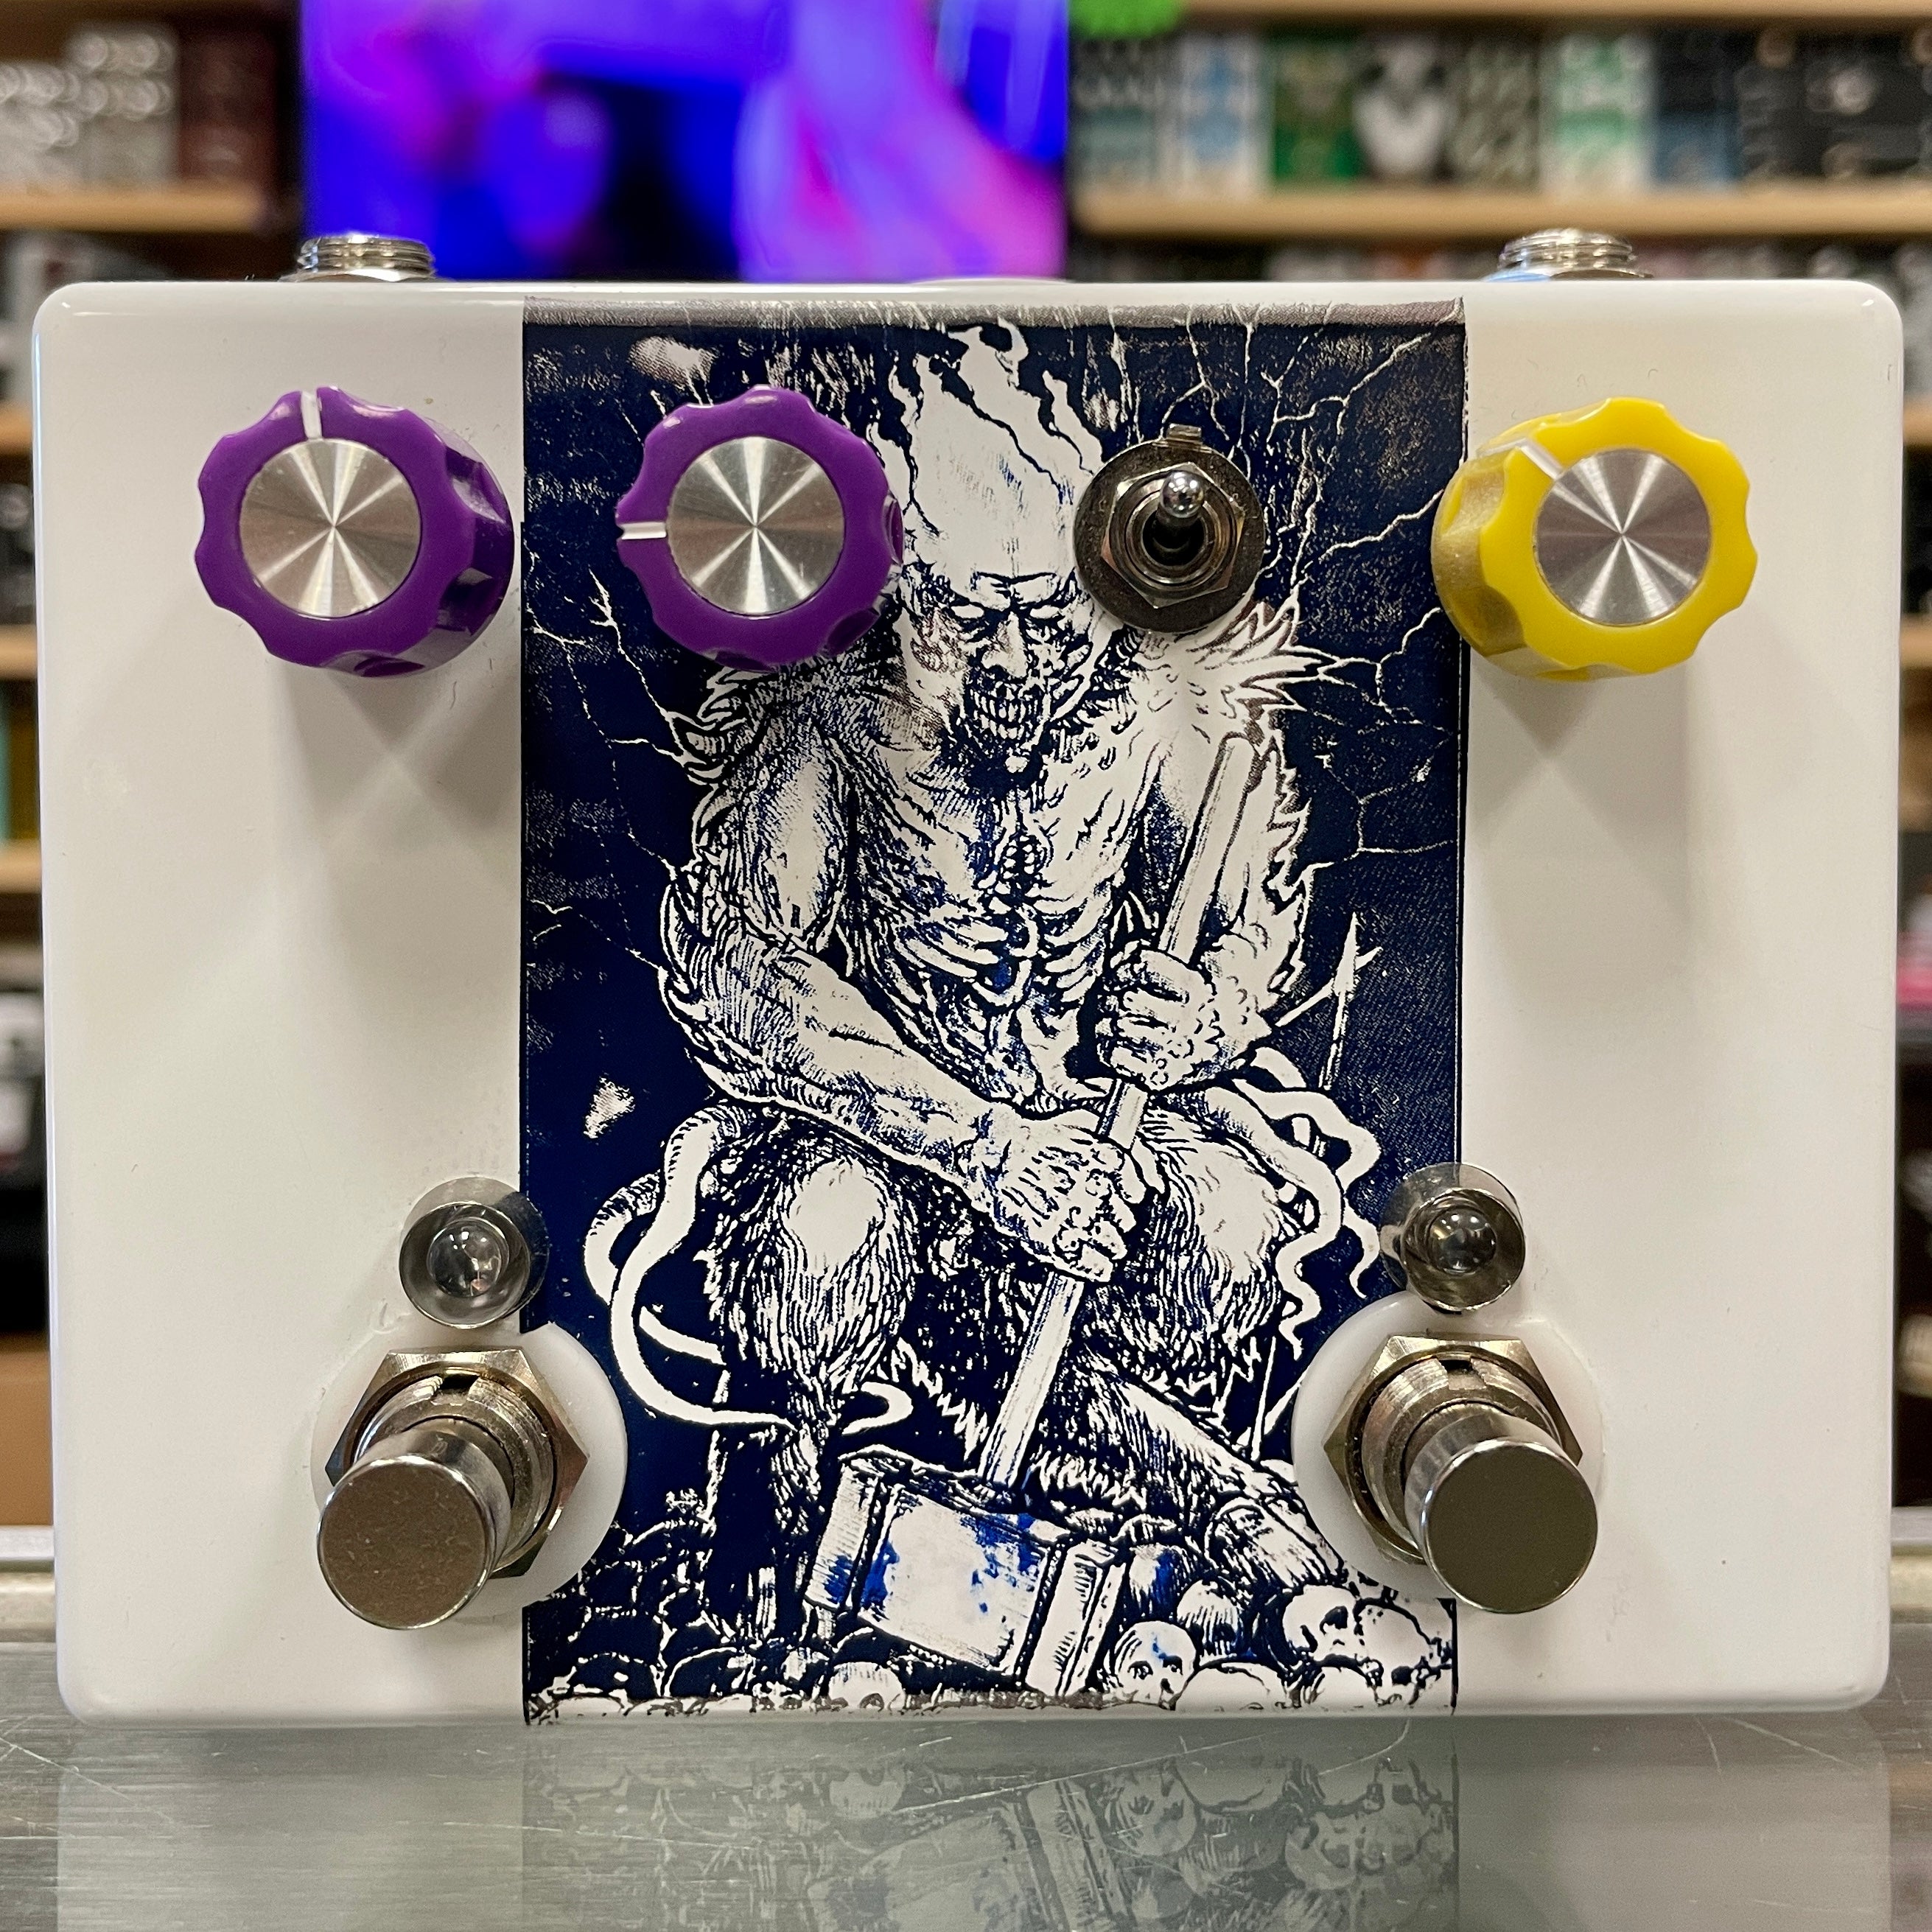 Petey's Pedals - "Shinigami" - Fuzz Face / Brian May Treble Booster